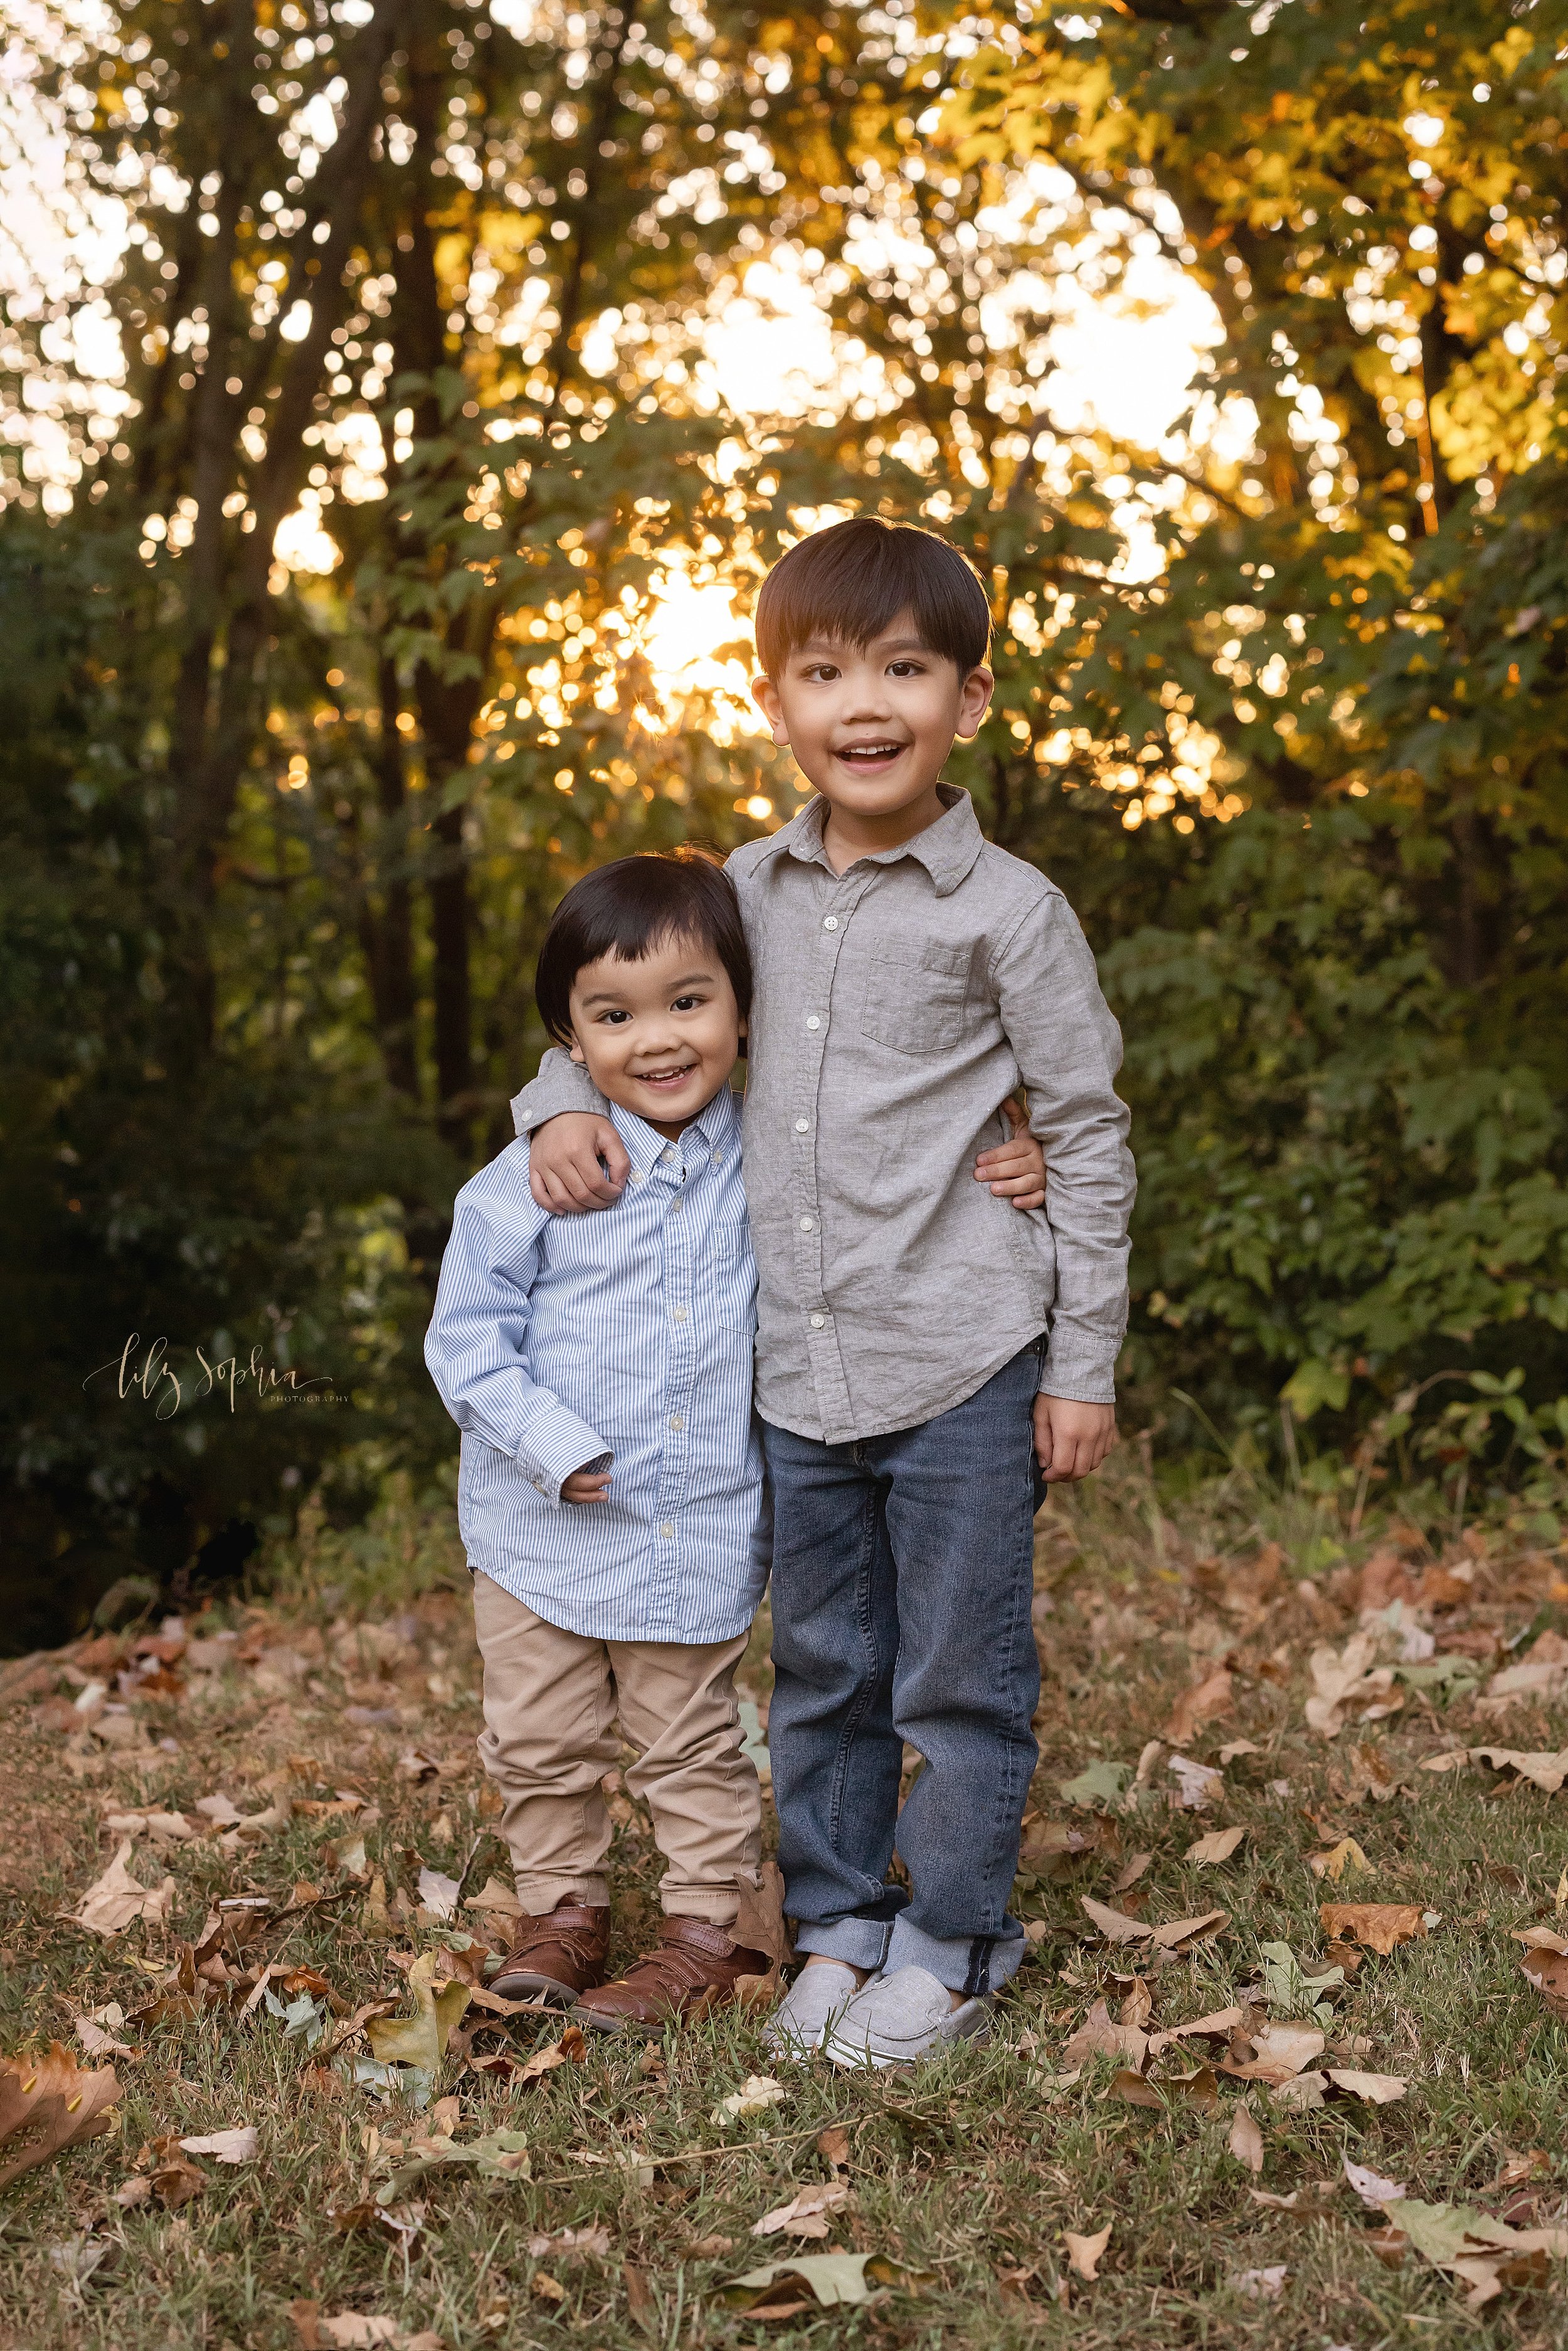  Family photo of Asian brothers as the older brother wraps his arm around the shoulder of the younger bother taken in an Atlanta park at sunset. 